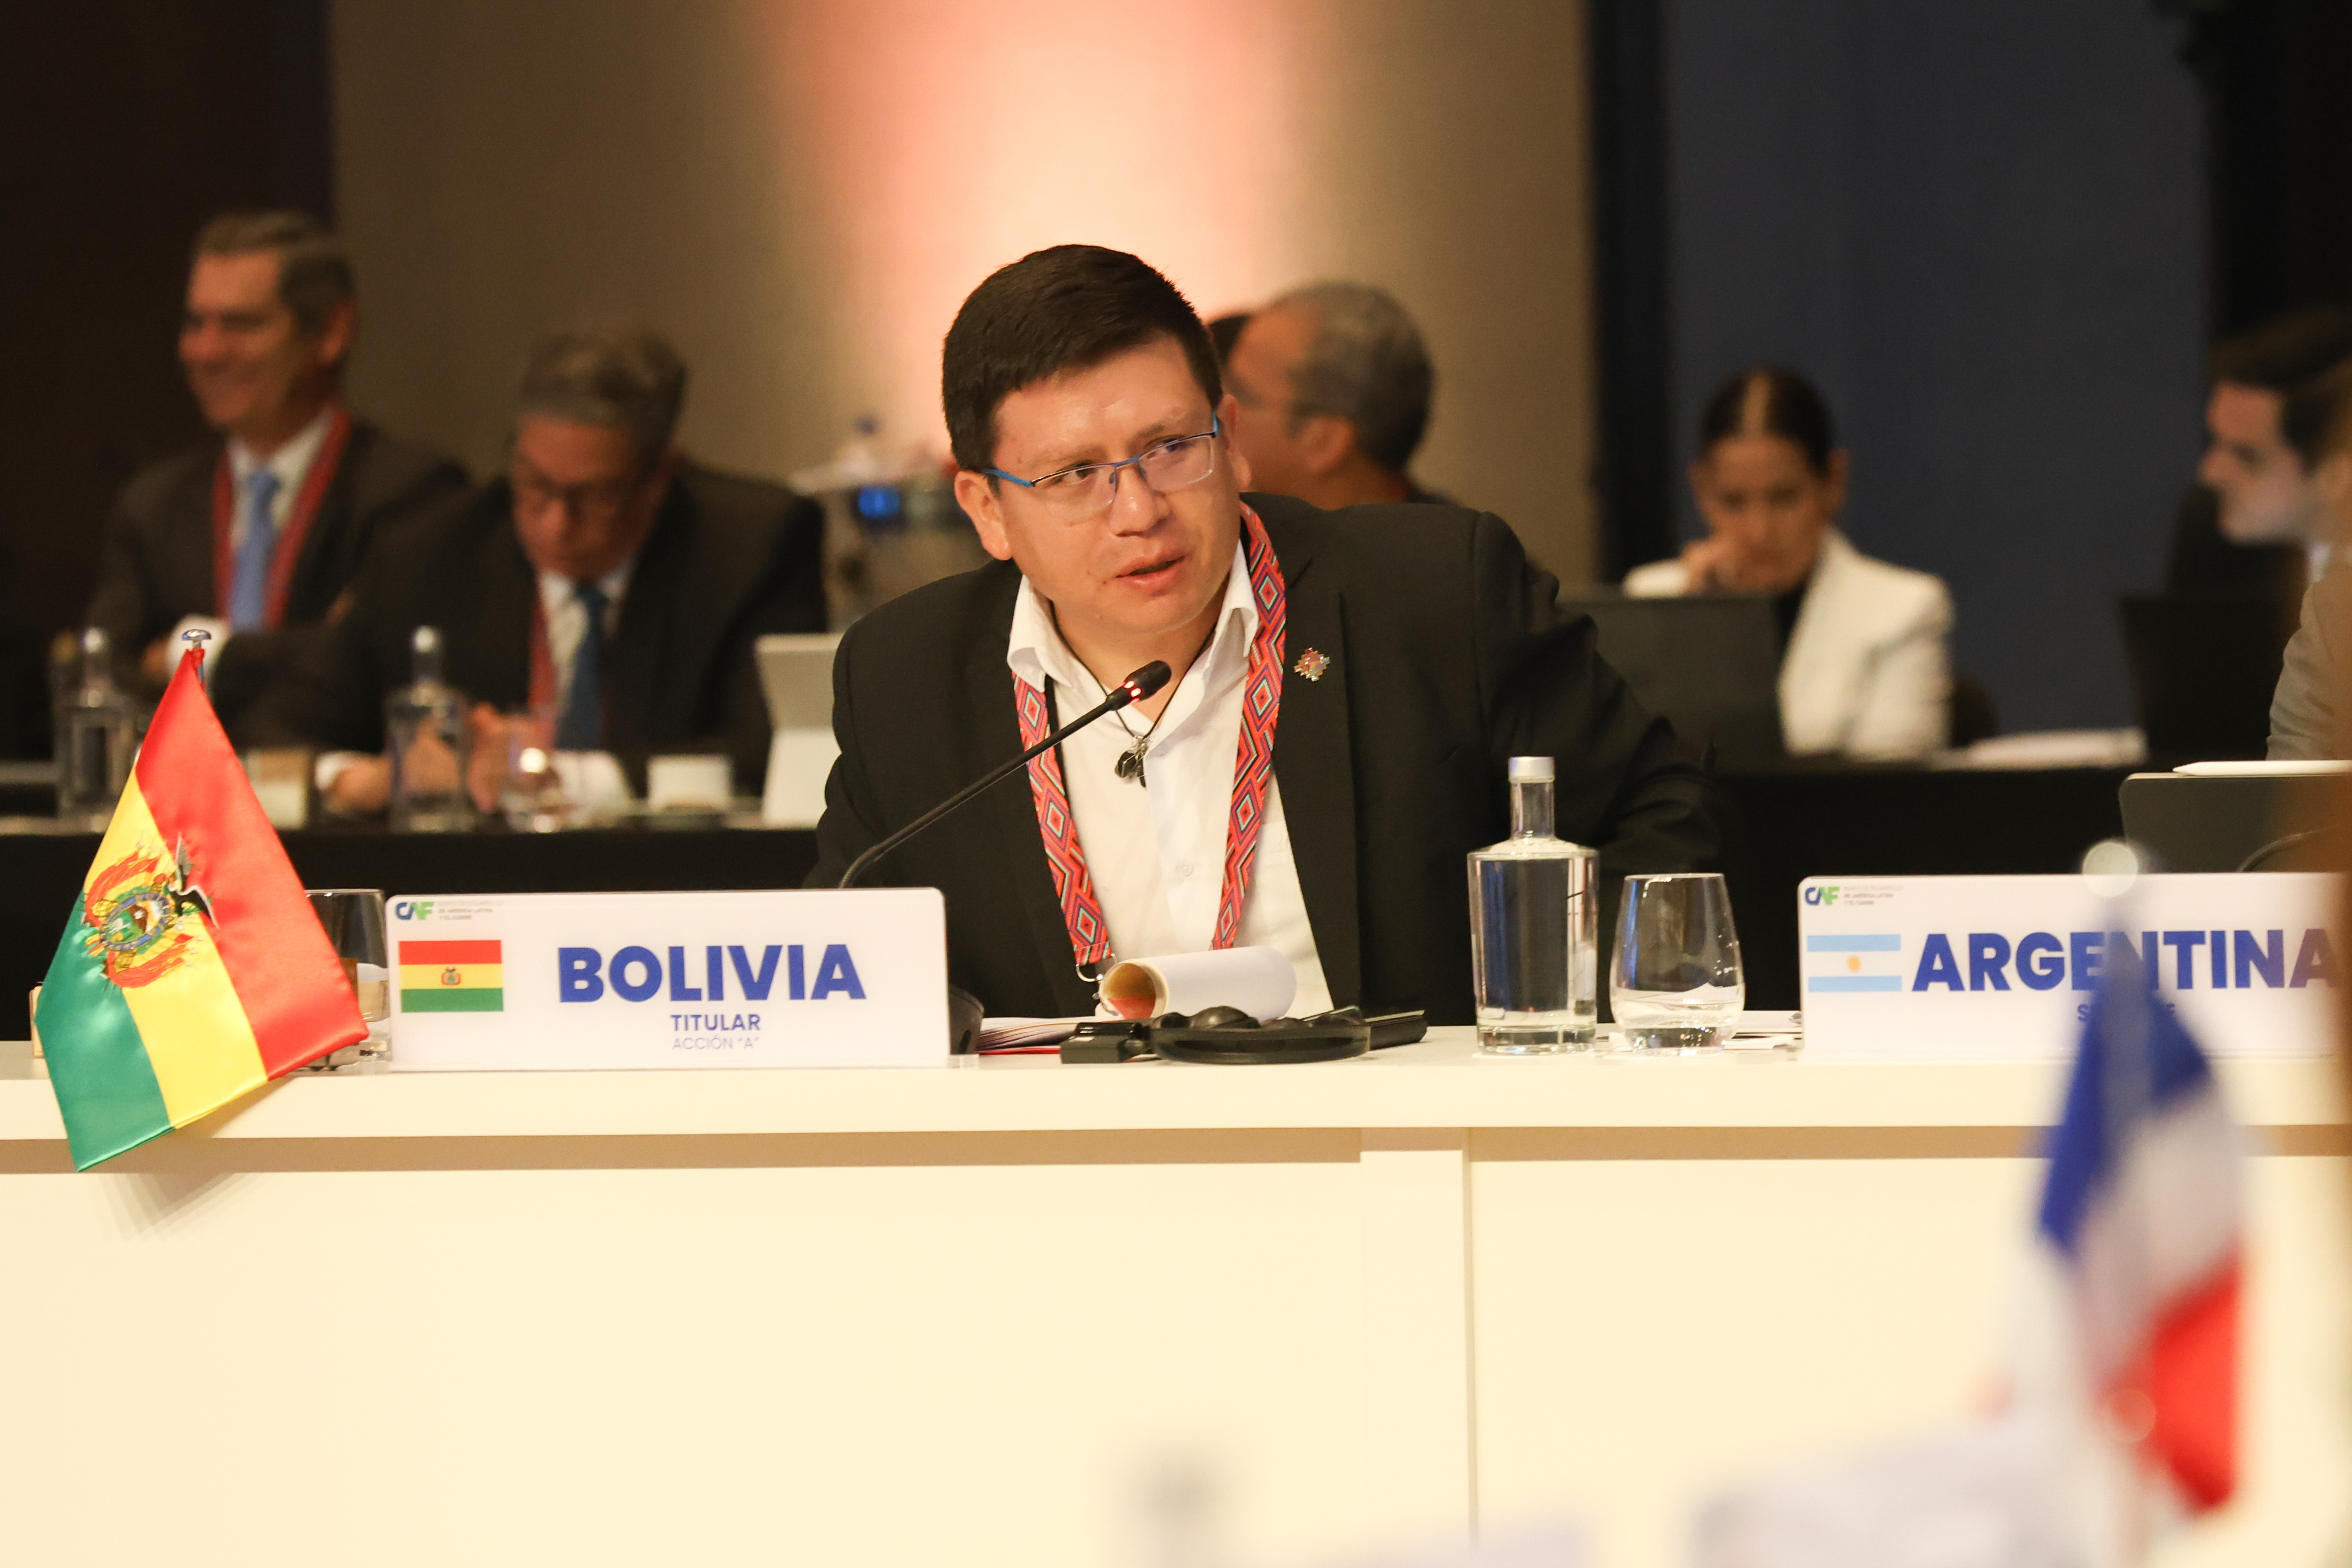 CAF boosts Bolivia´s rural development with USD 110 million investment